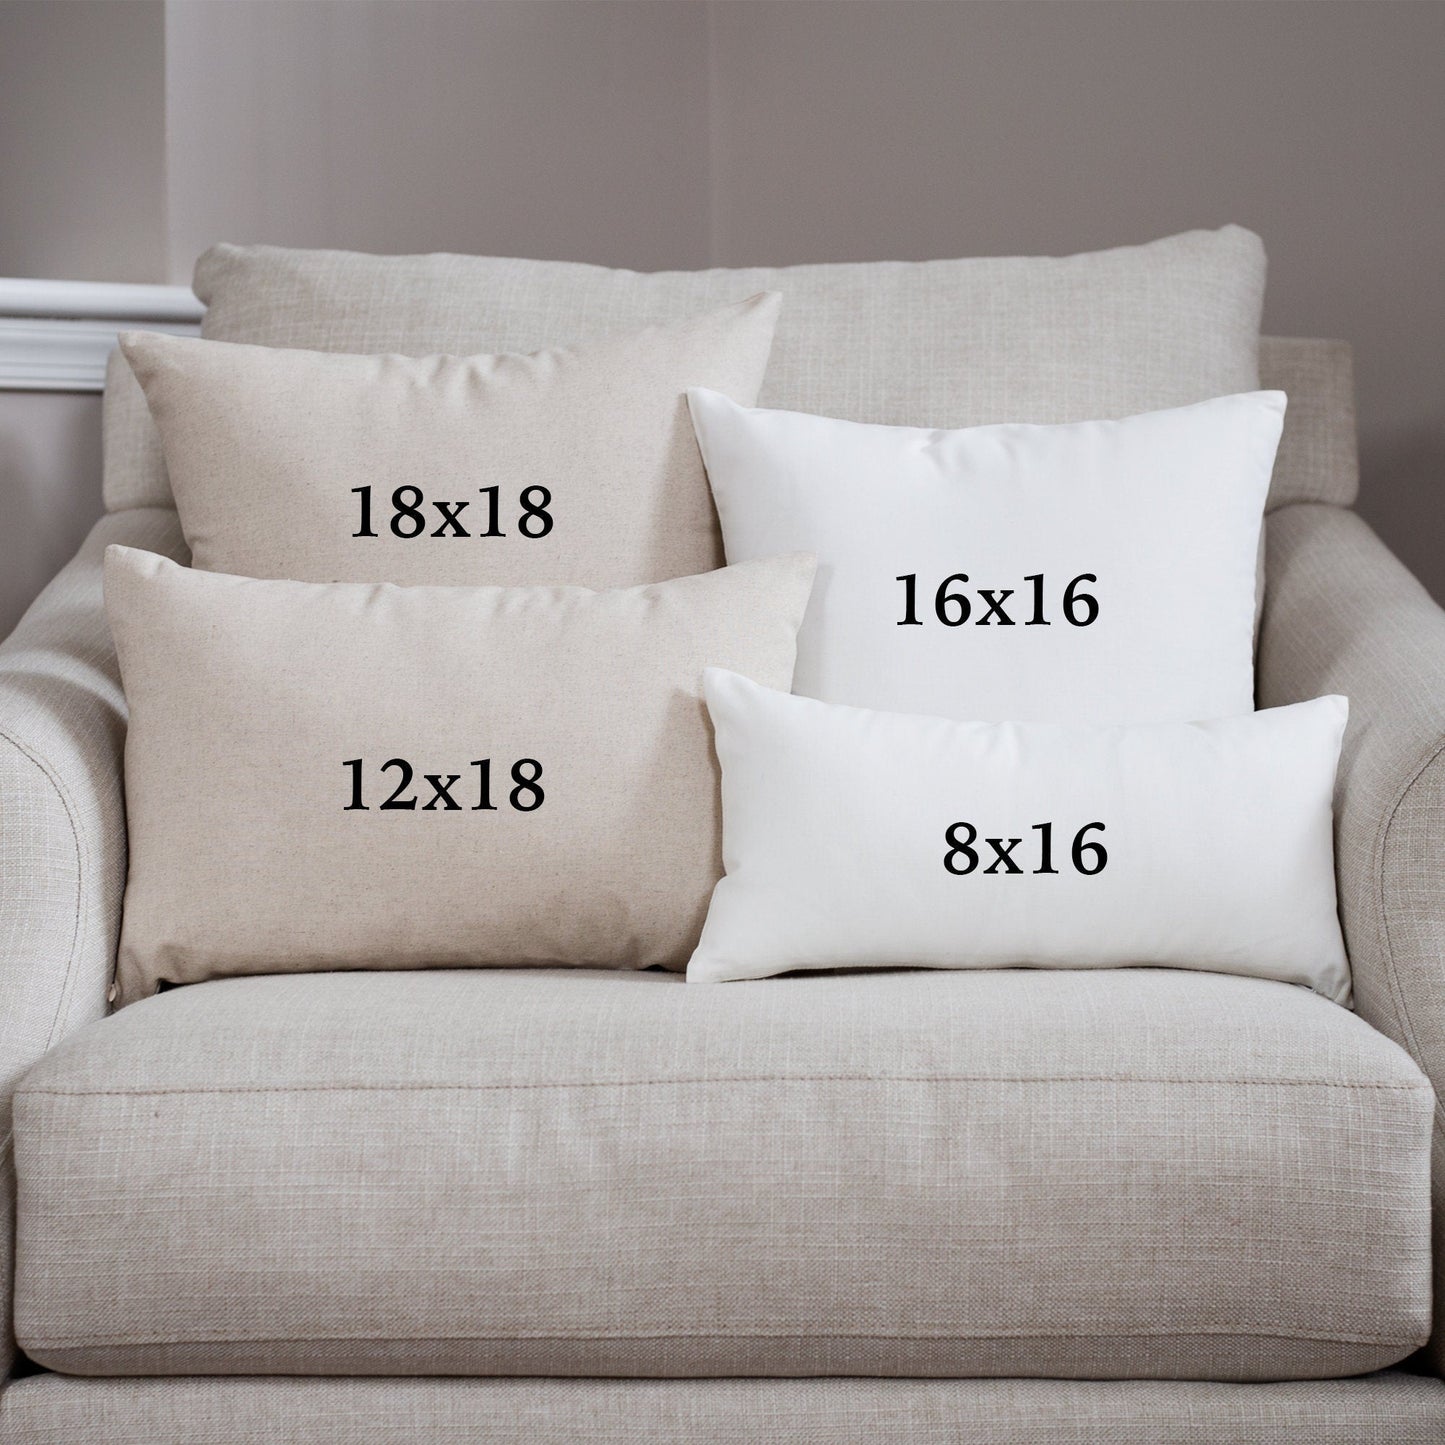 Load image into Gallery viewer, Family Tree Pillow | Grandkids Names | Grandparent Gift | Personalized Grandchildren Names | Gift For Grandparents | Names of Grandchildren
